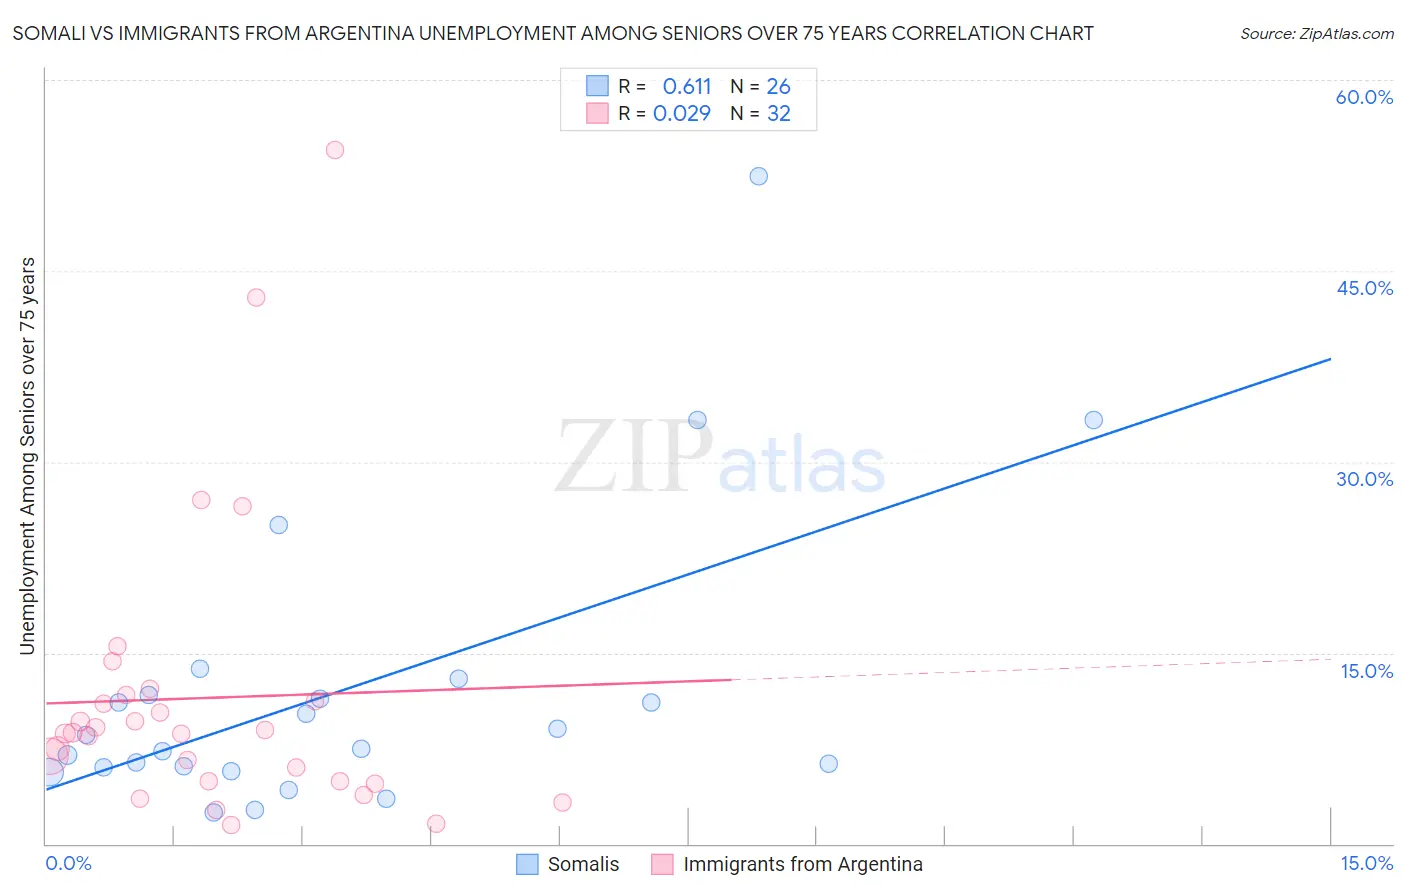 Somali vs Immigrants from Argentina Unemployment Among Seniors over 75 years